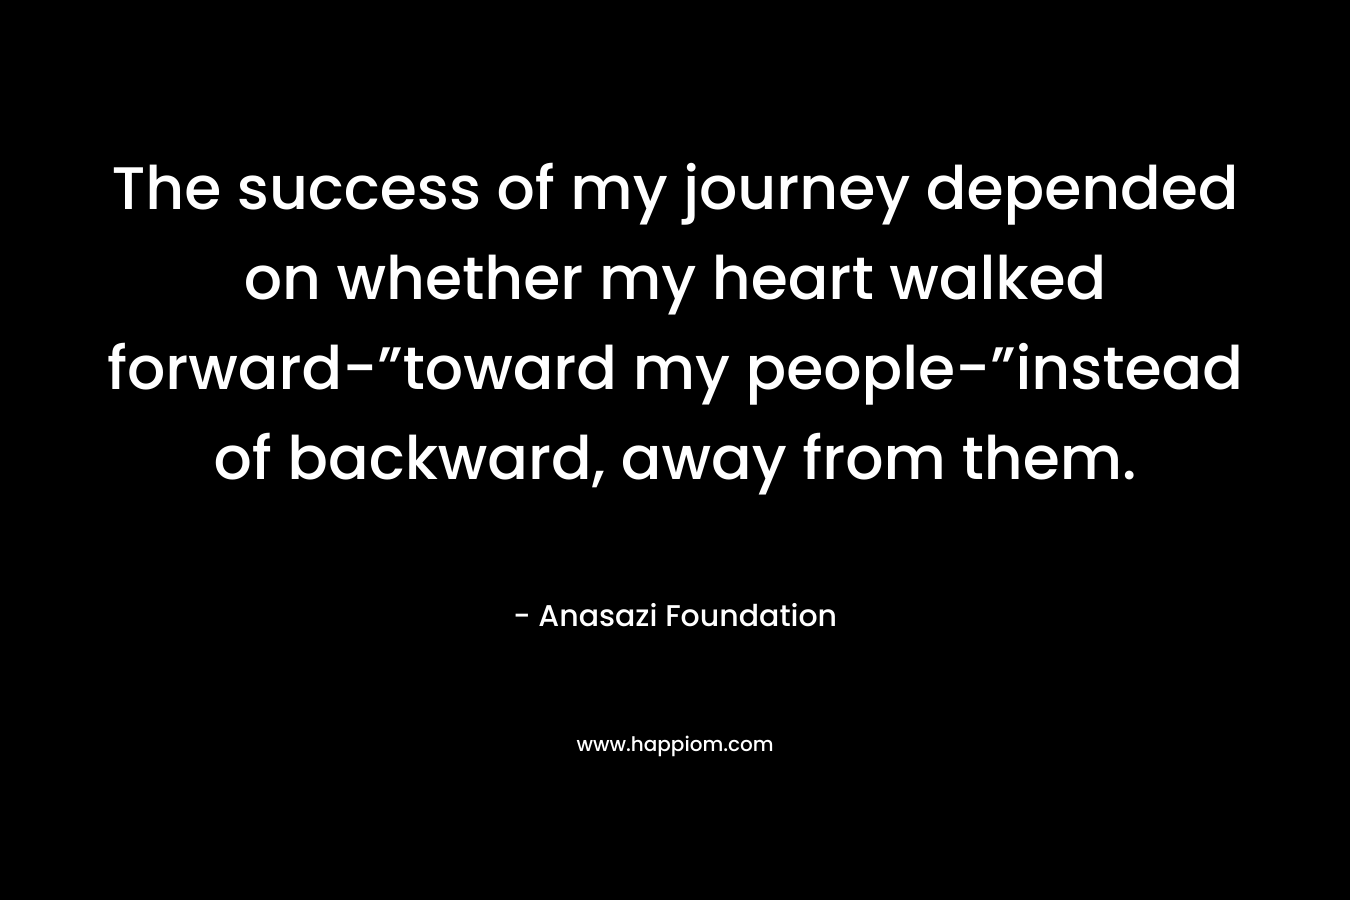 The success of my journey depended on whether my heart walked forward-”toward my people-”instead of backward, away from them. – Anasazi Foundation